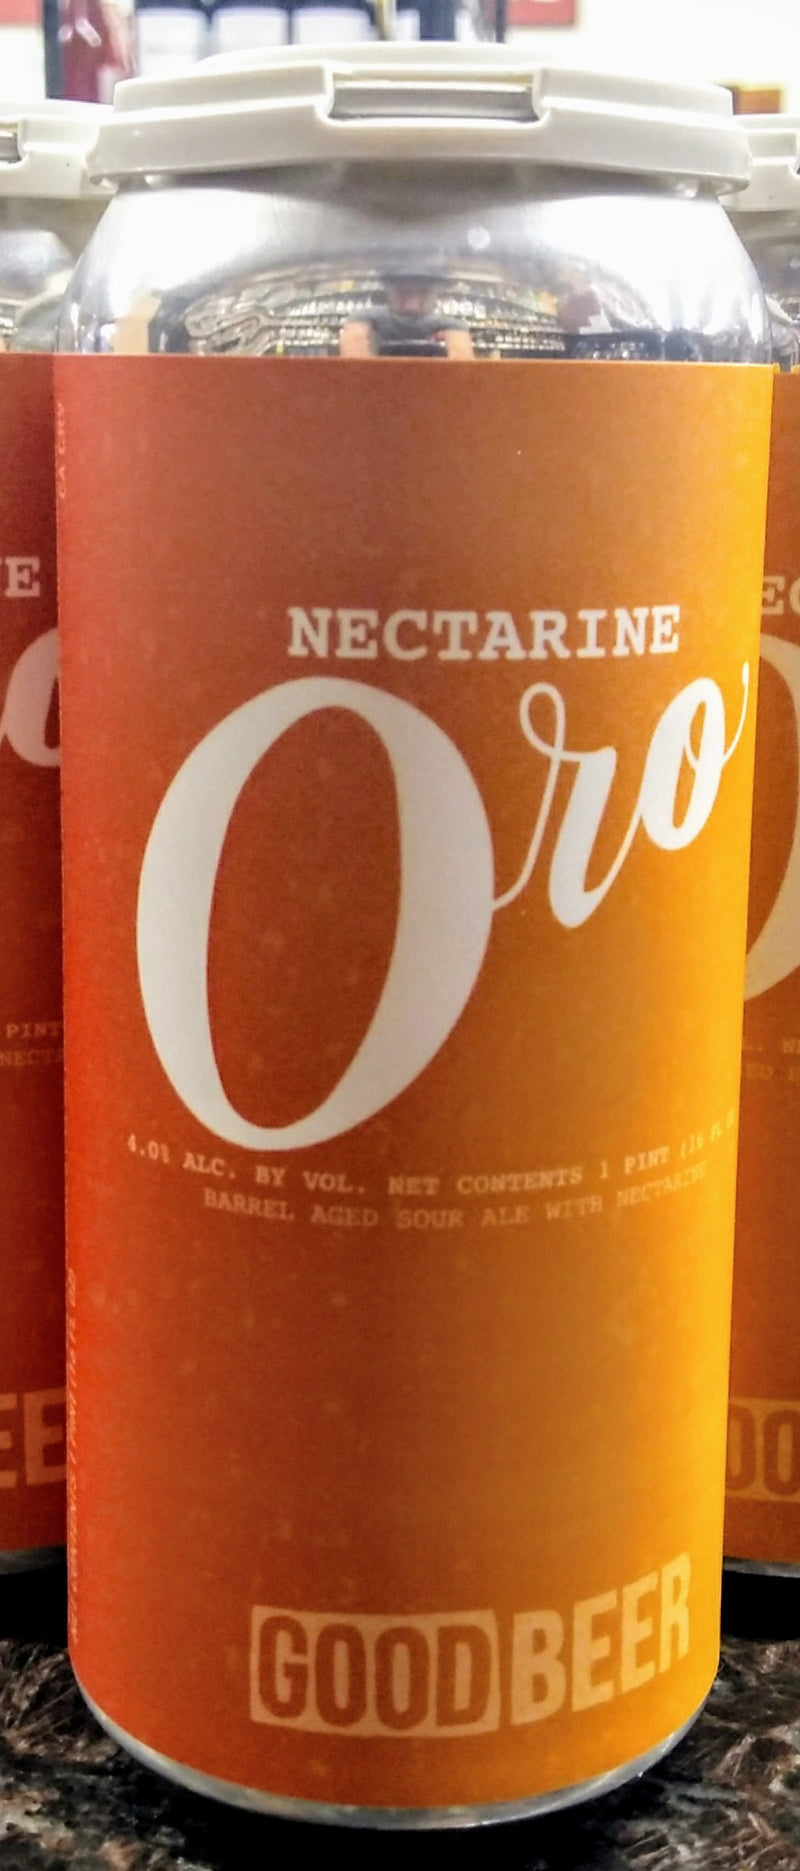 THE GOOD BEER CO. ORO NECTARINE BARREL AGED SOUR ALE 16oz can